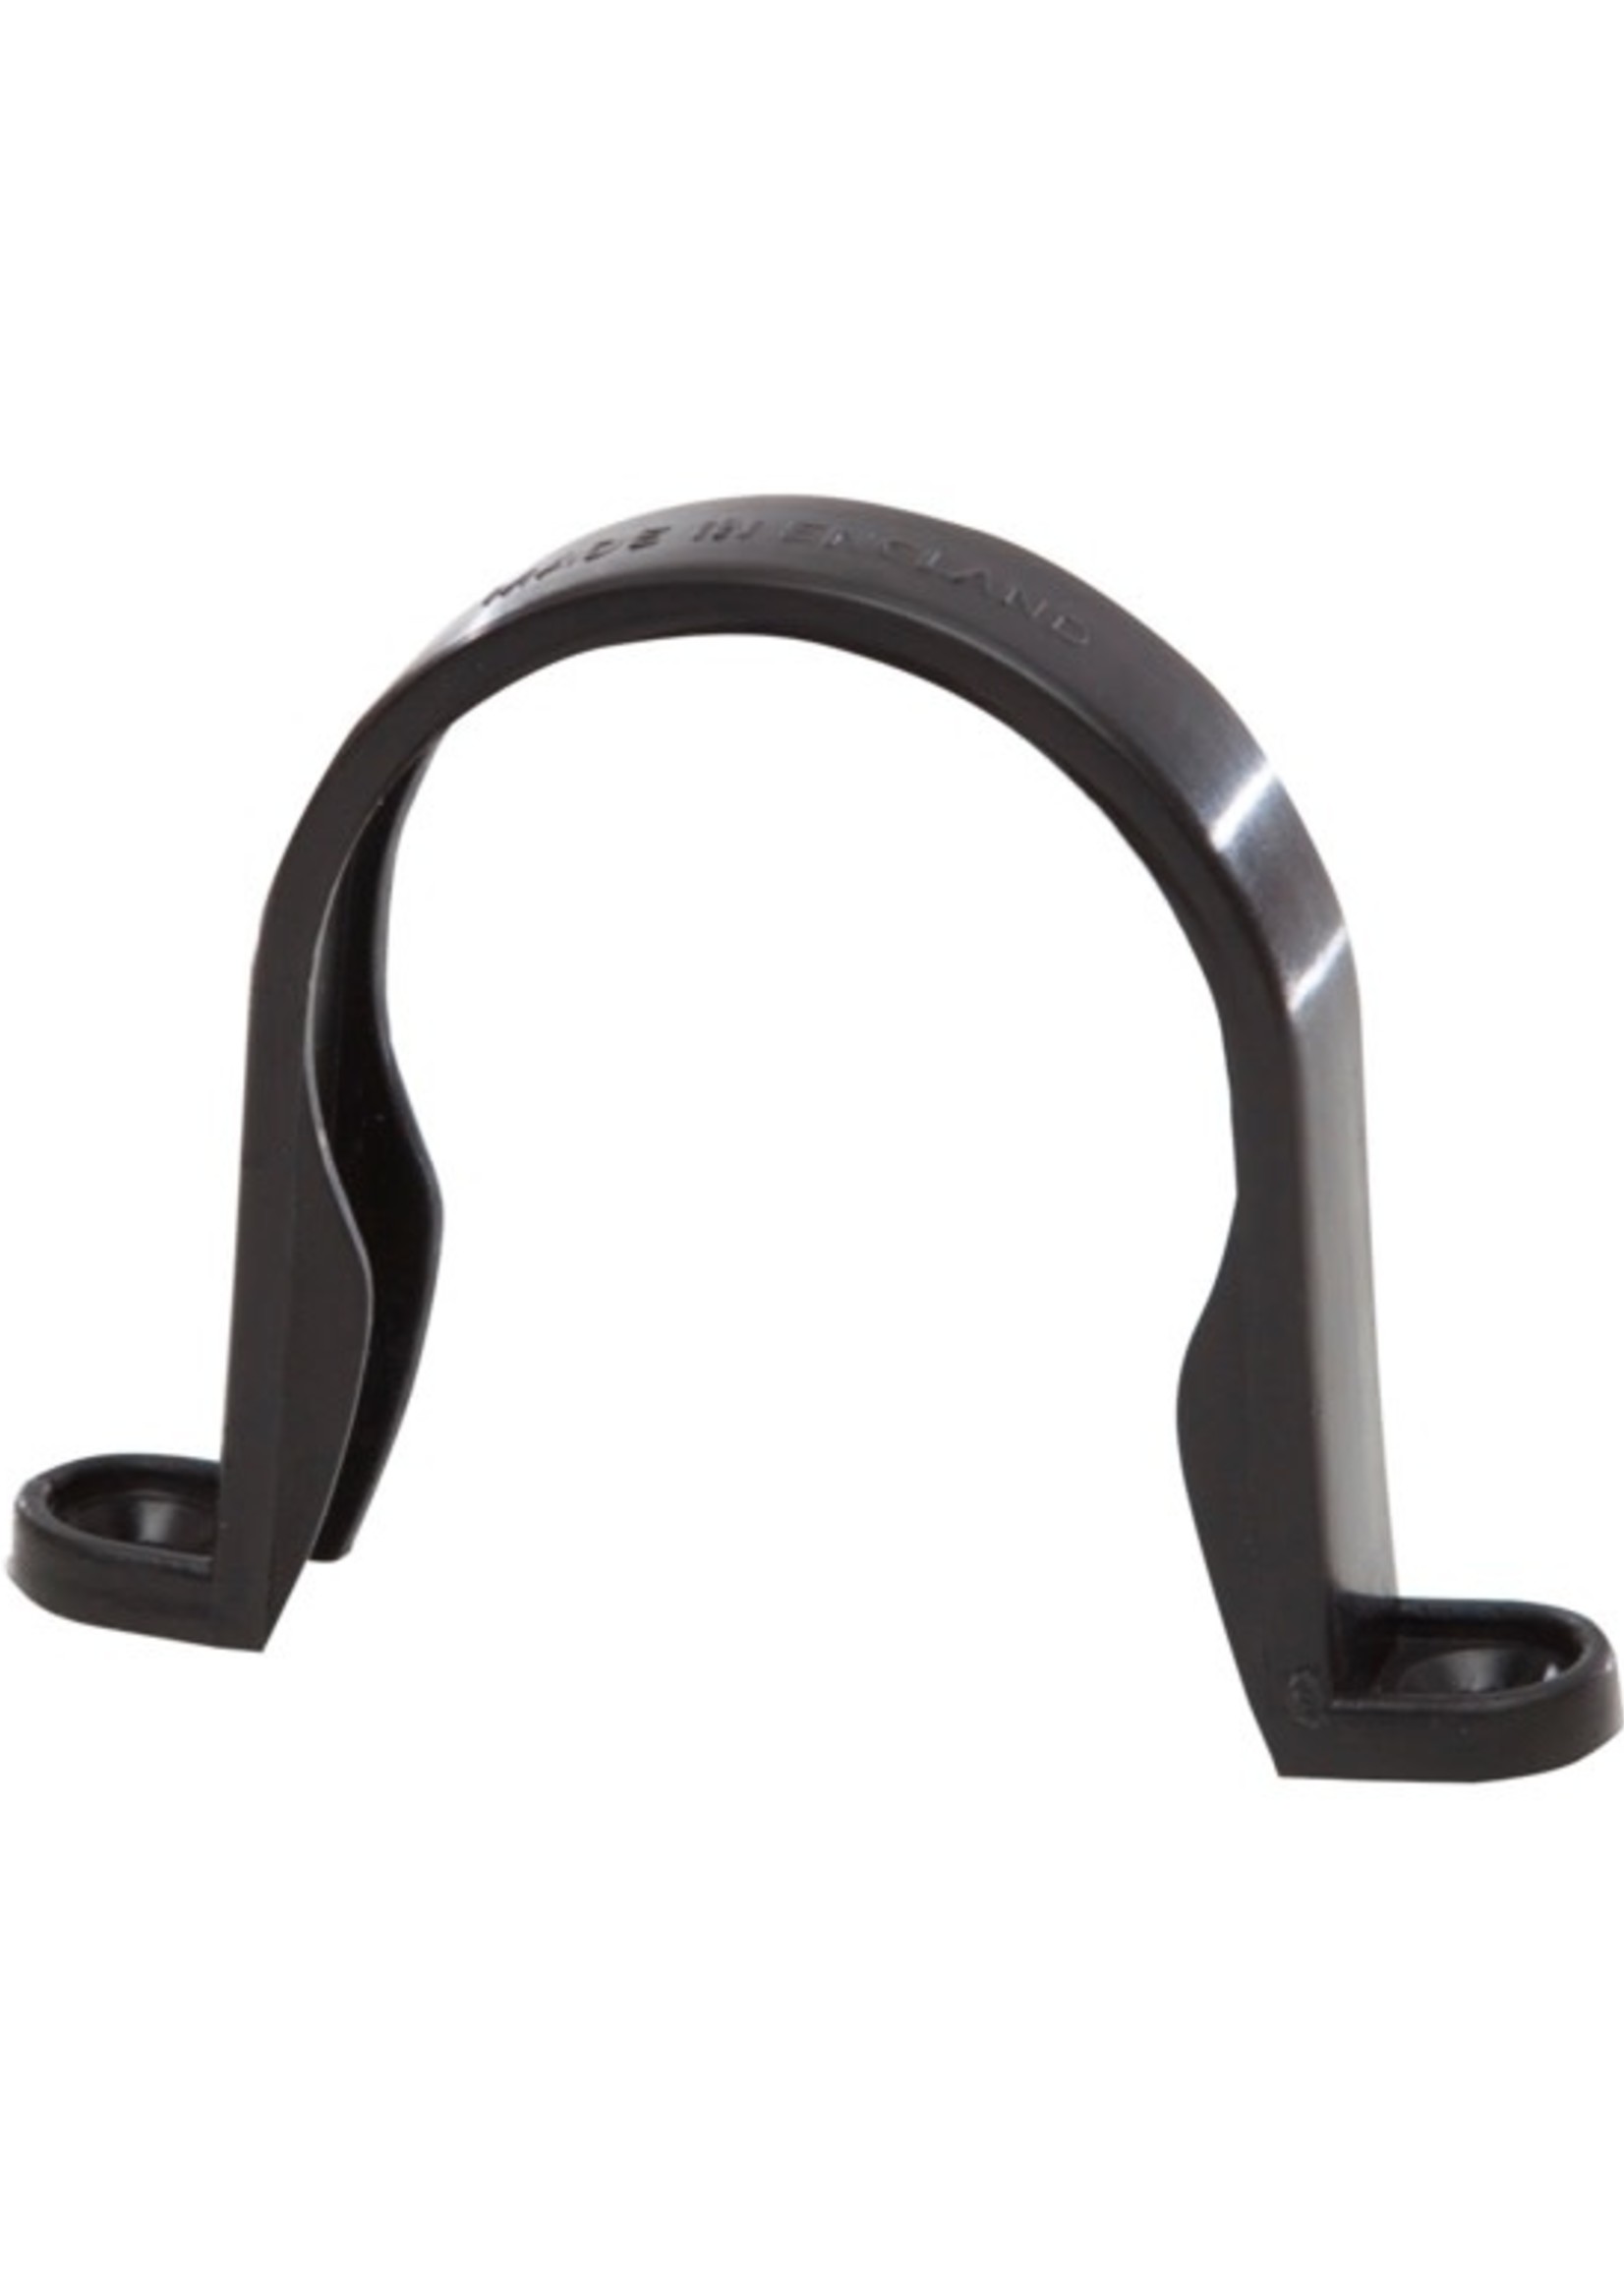 Polypipe Polypipe Round Downpipe Bracket Black 50mm